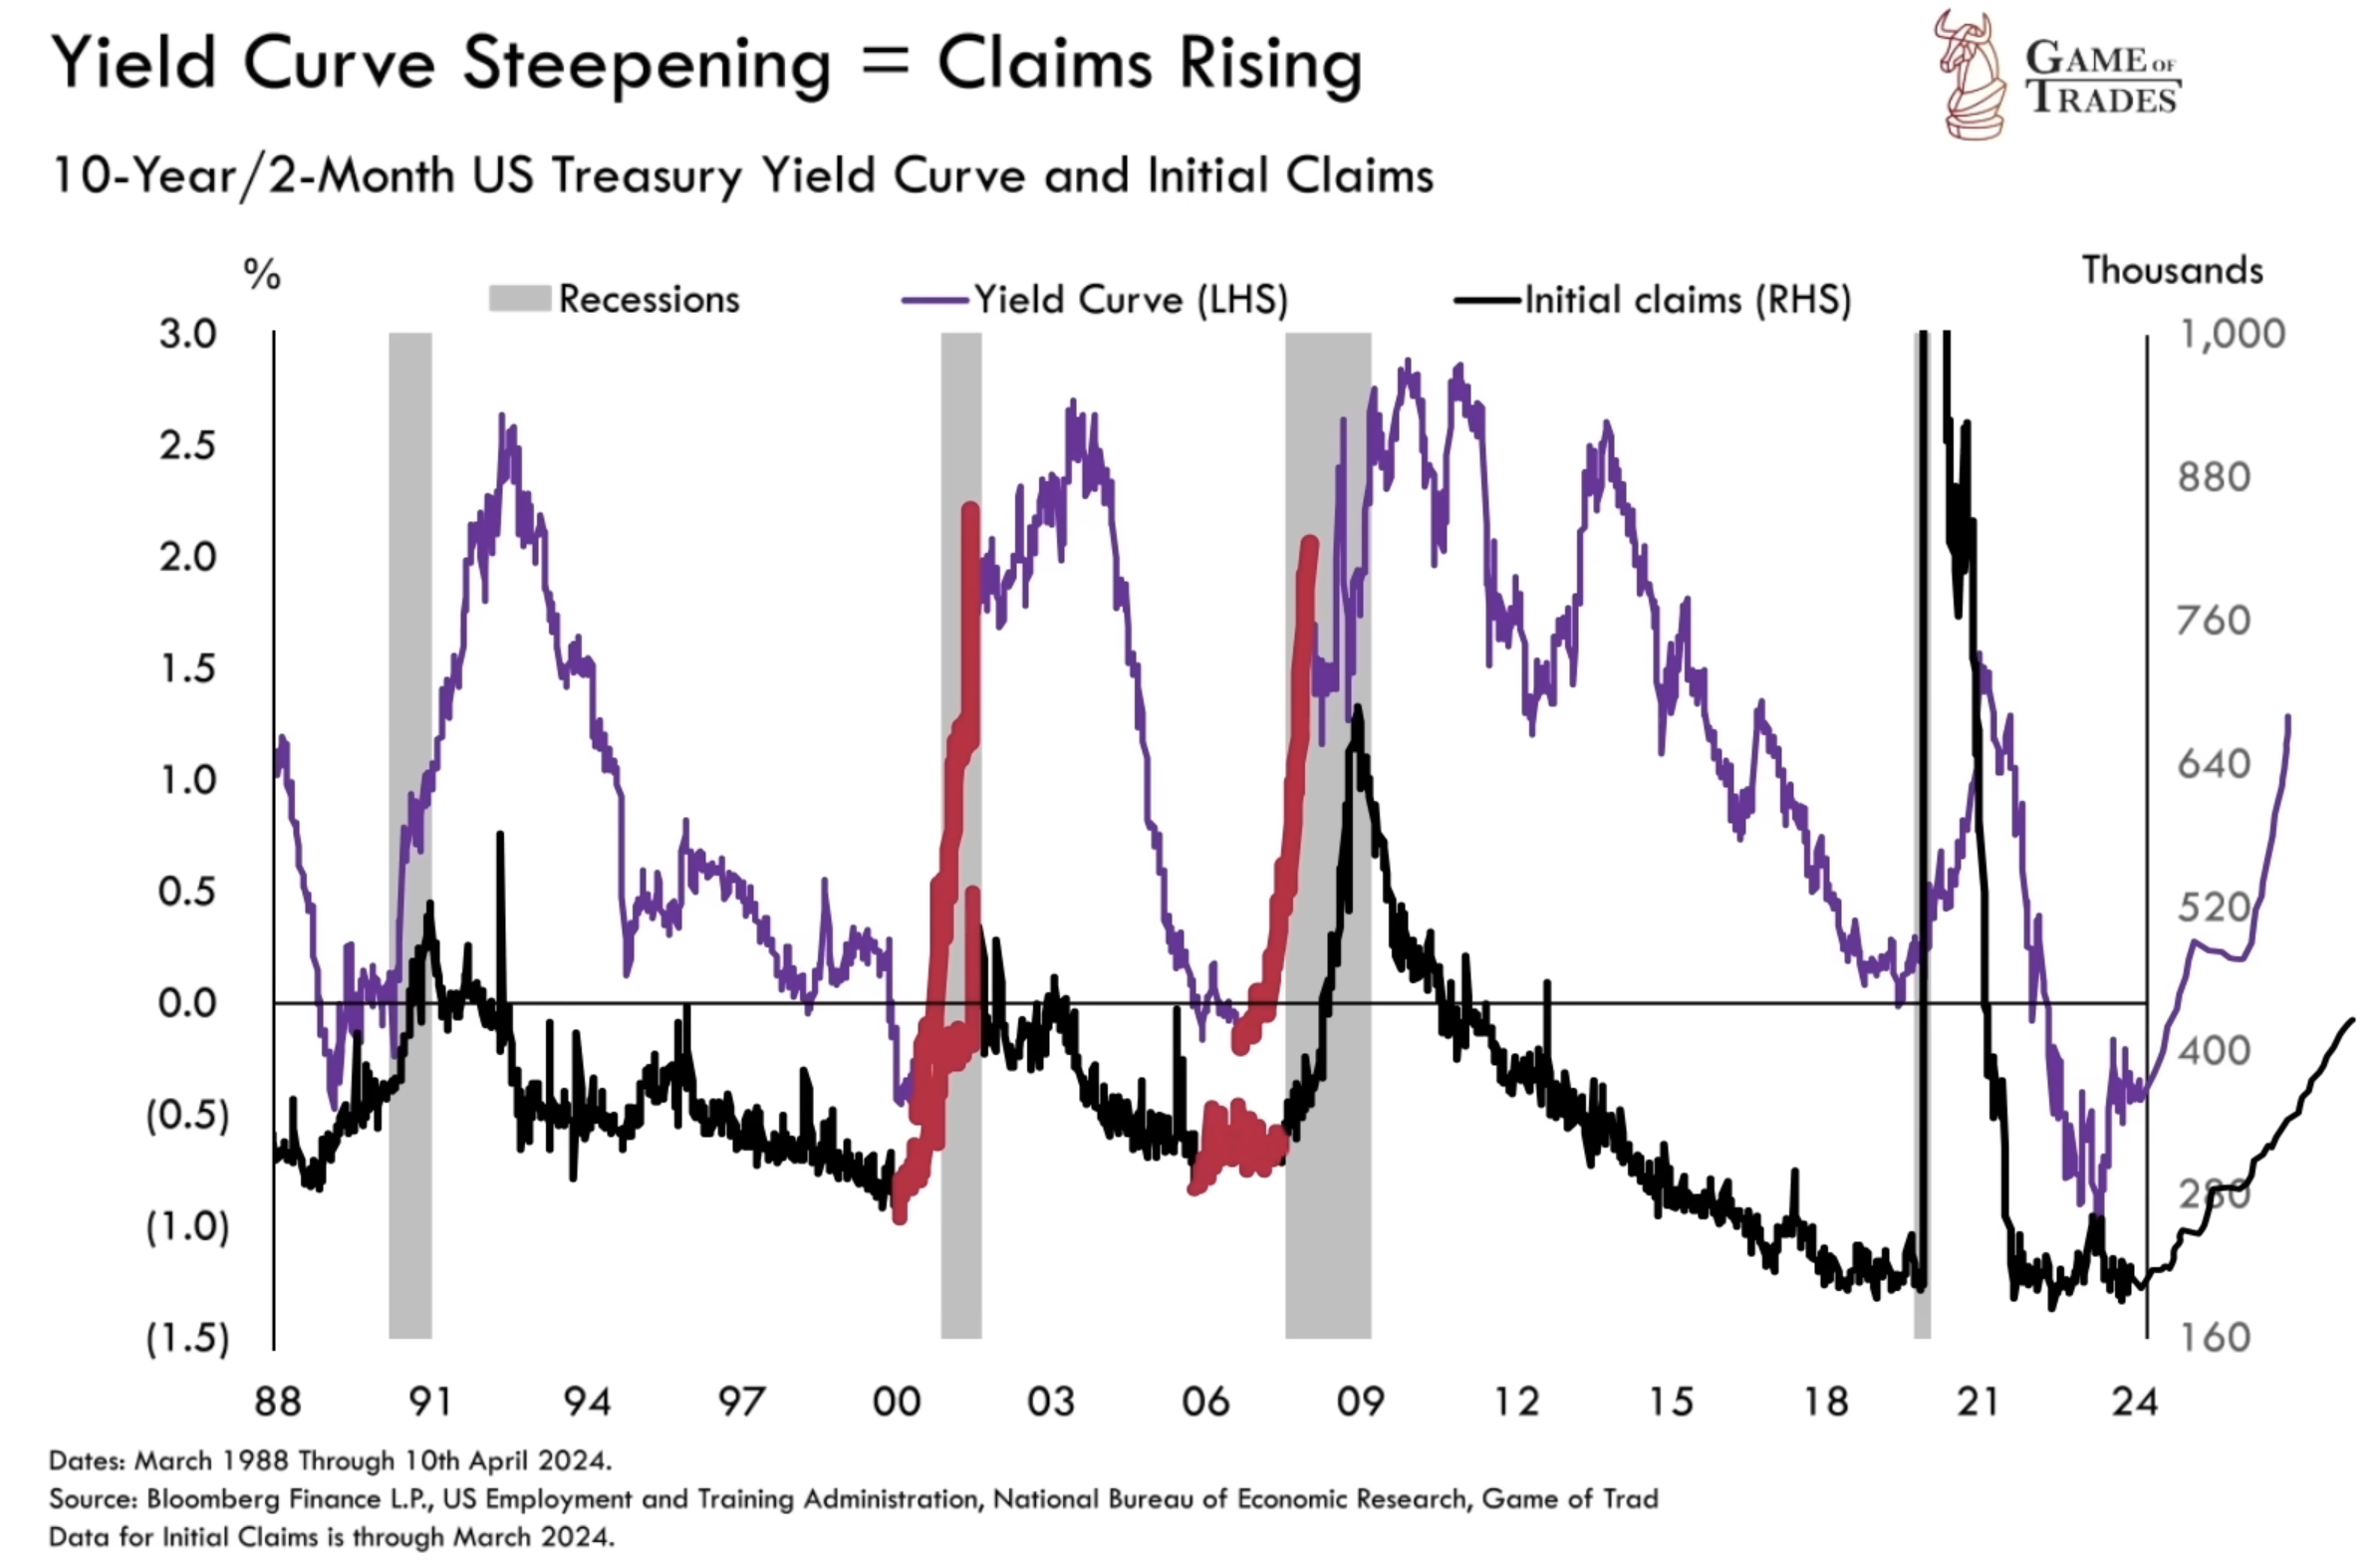 Yield curve and initial claims